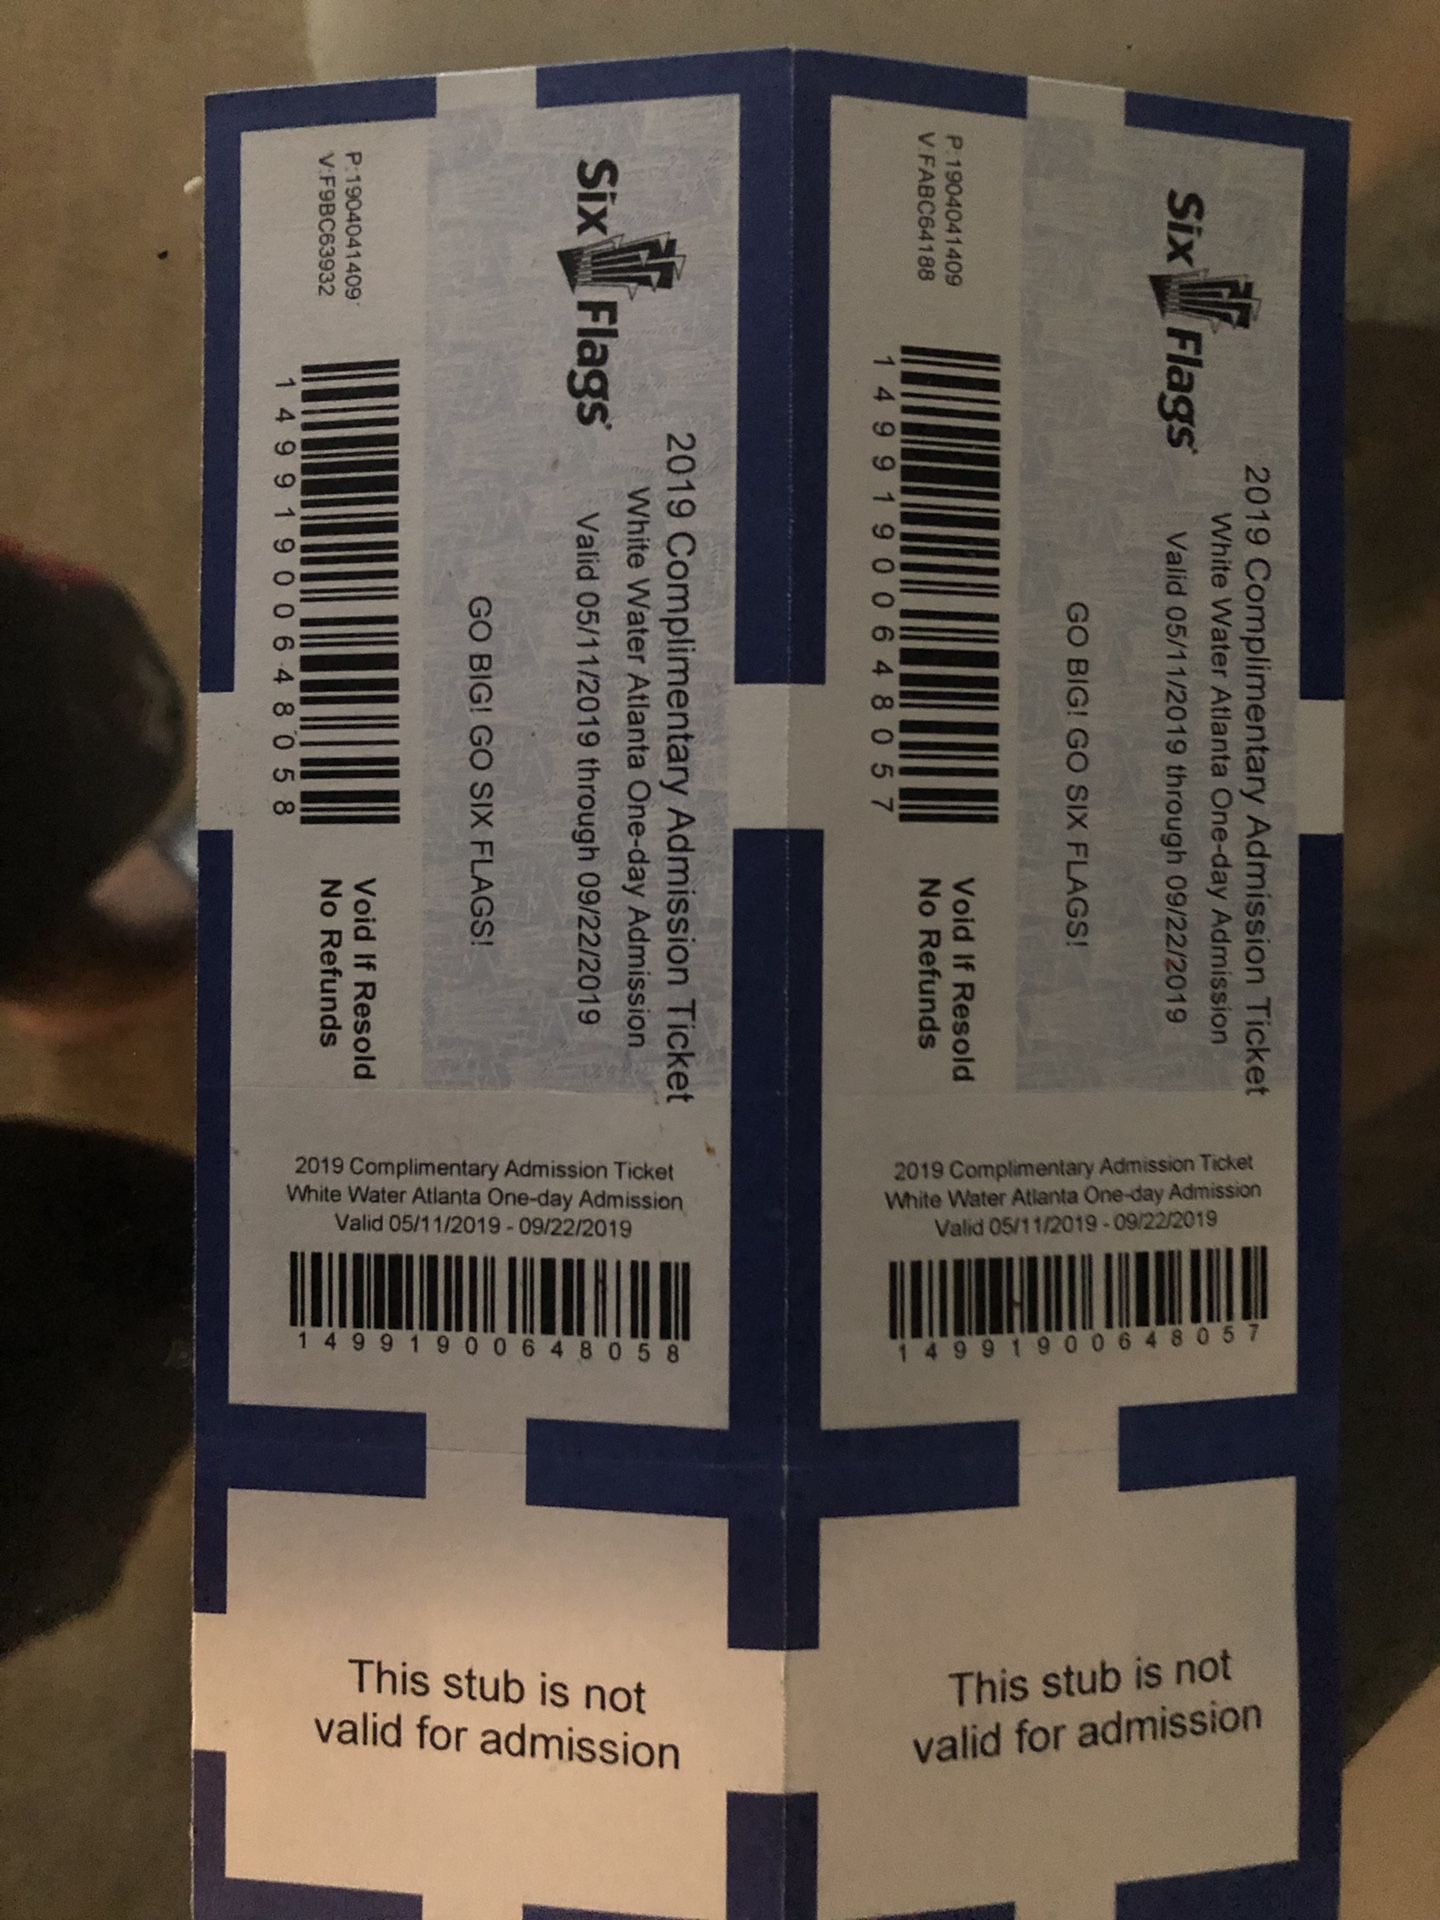 Whitewater tickets